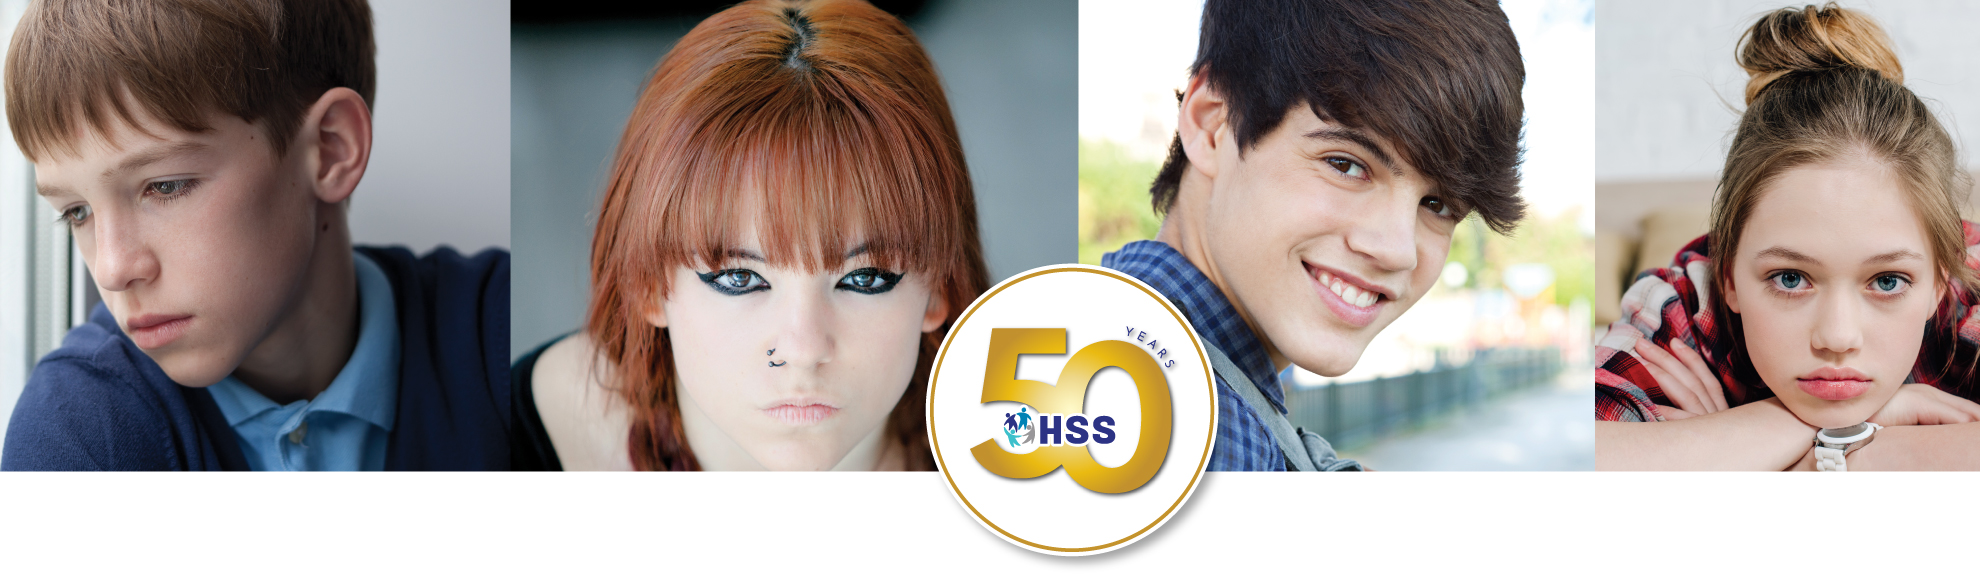 Four Images of Youth with 50 Years HSS Logo